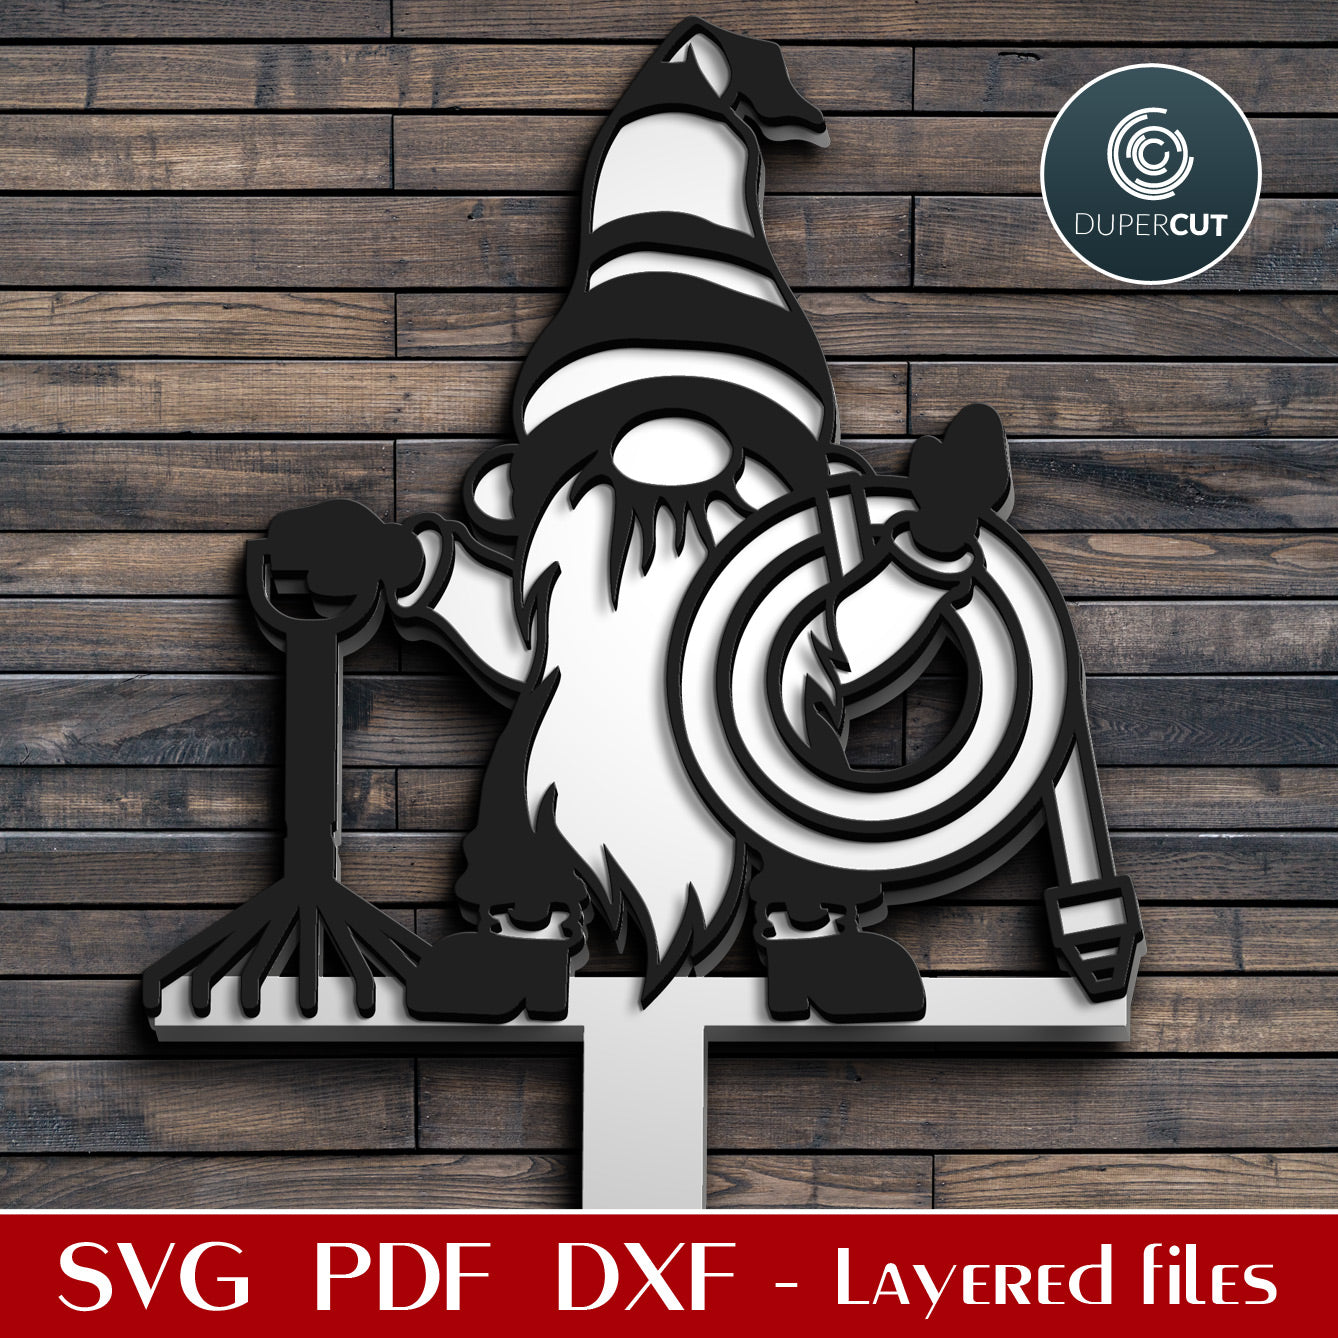 Garden gnome DIY yard decoration pattern - SVG DXF layered cutting files for Glowforge, Cricut, Silhouette cameo, CNC pattern by DuperCut.com